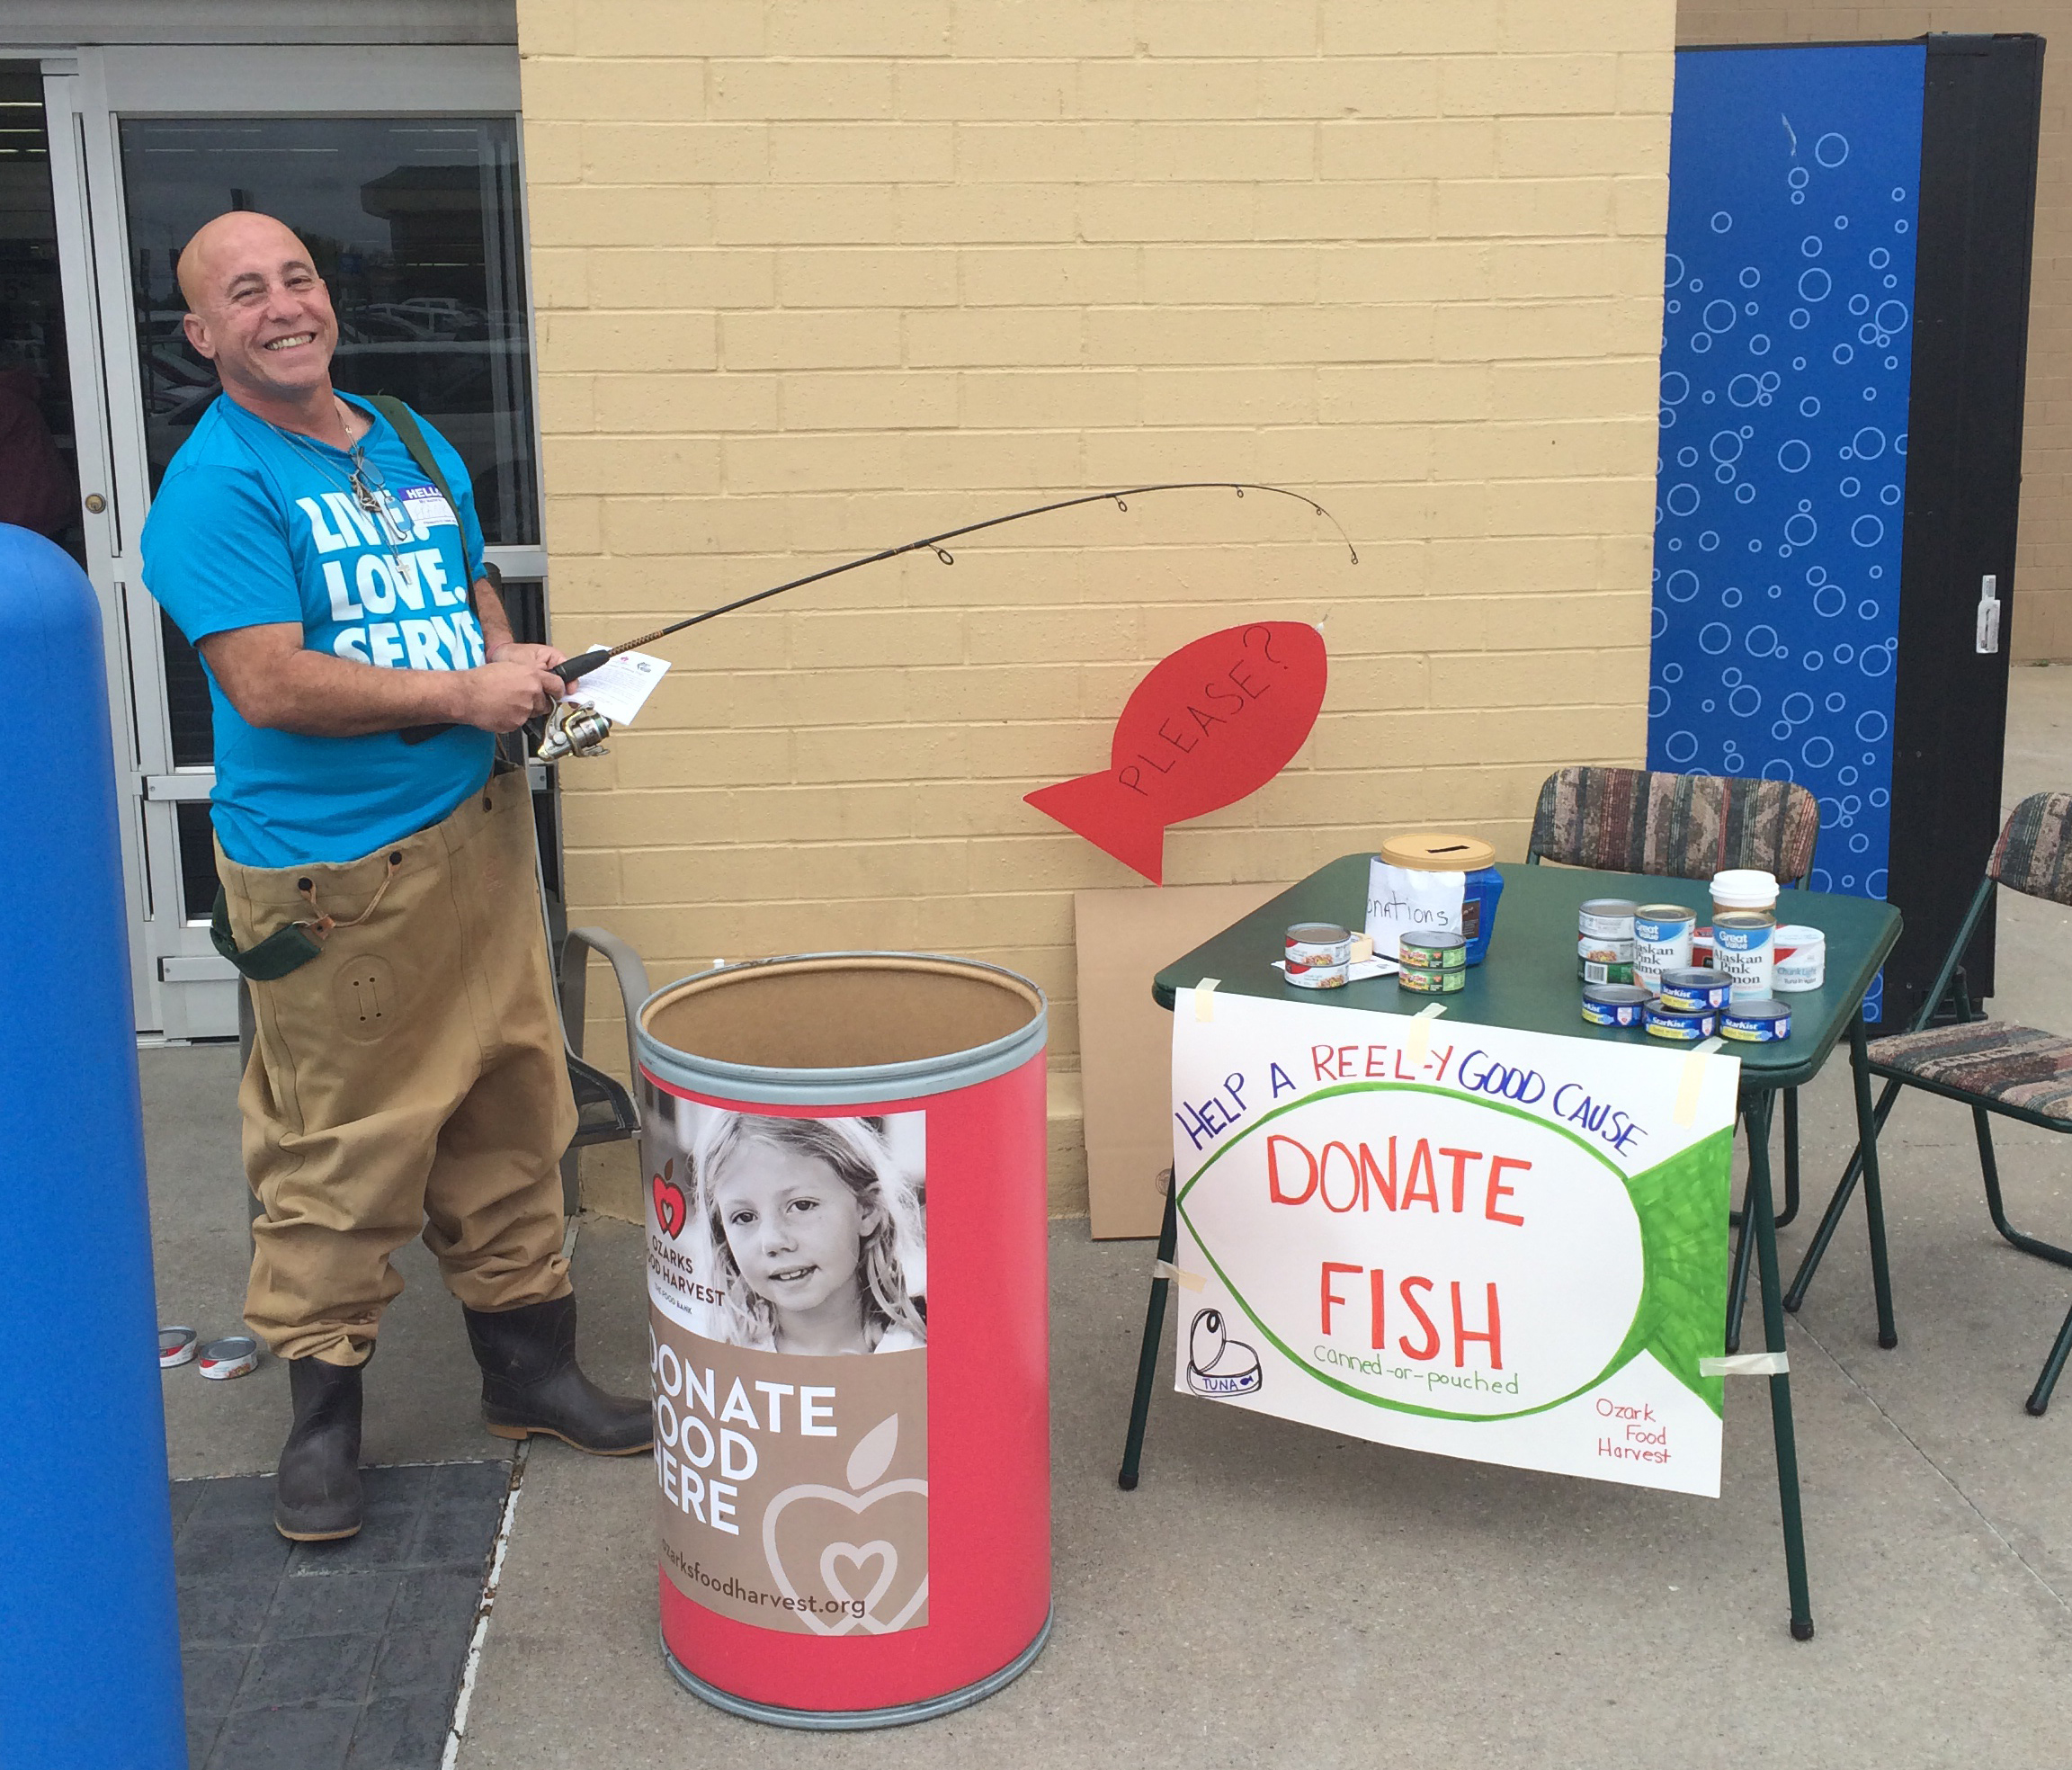 OFH asks public to participate in Fish Drive